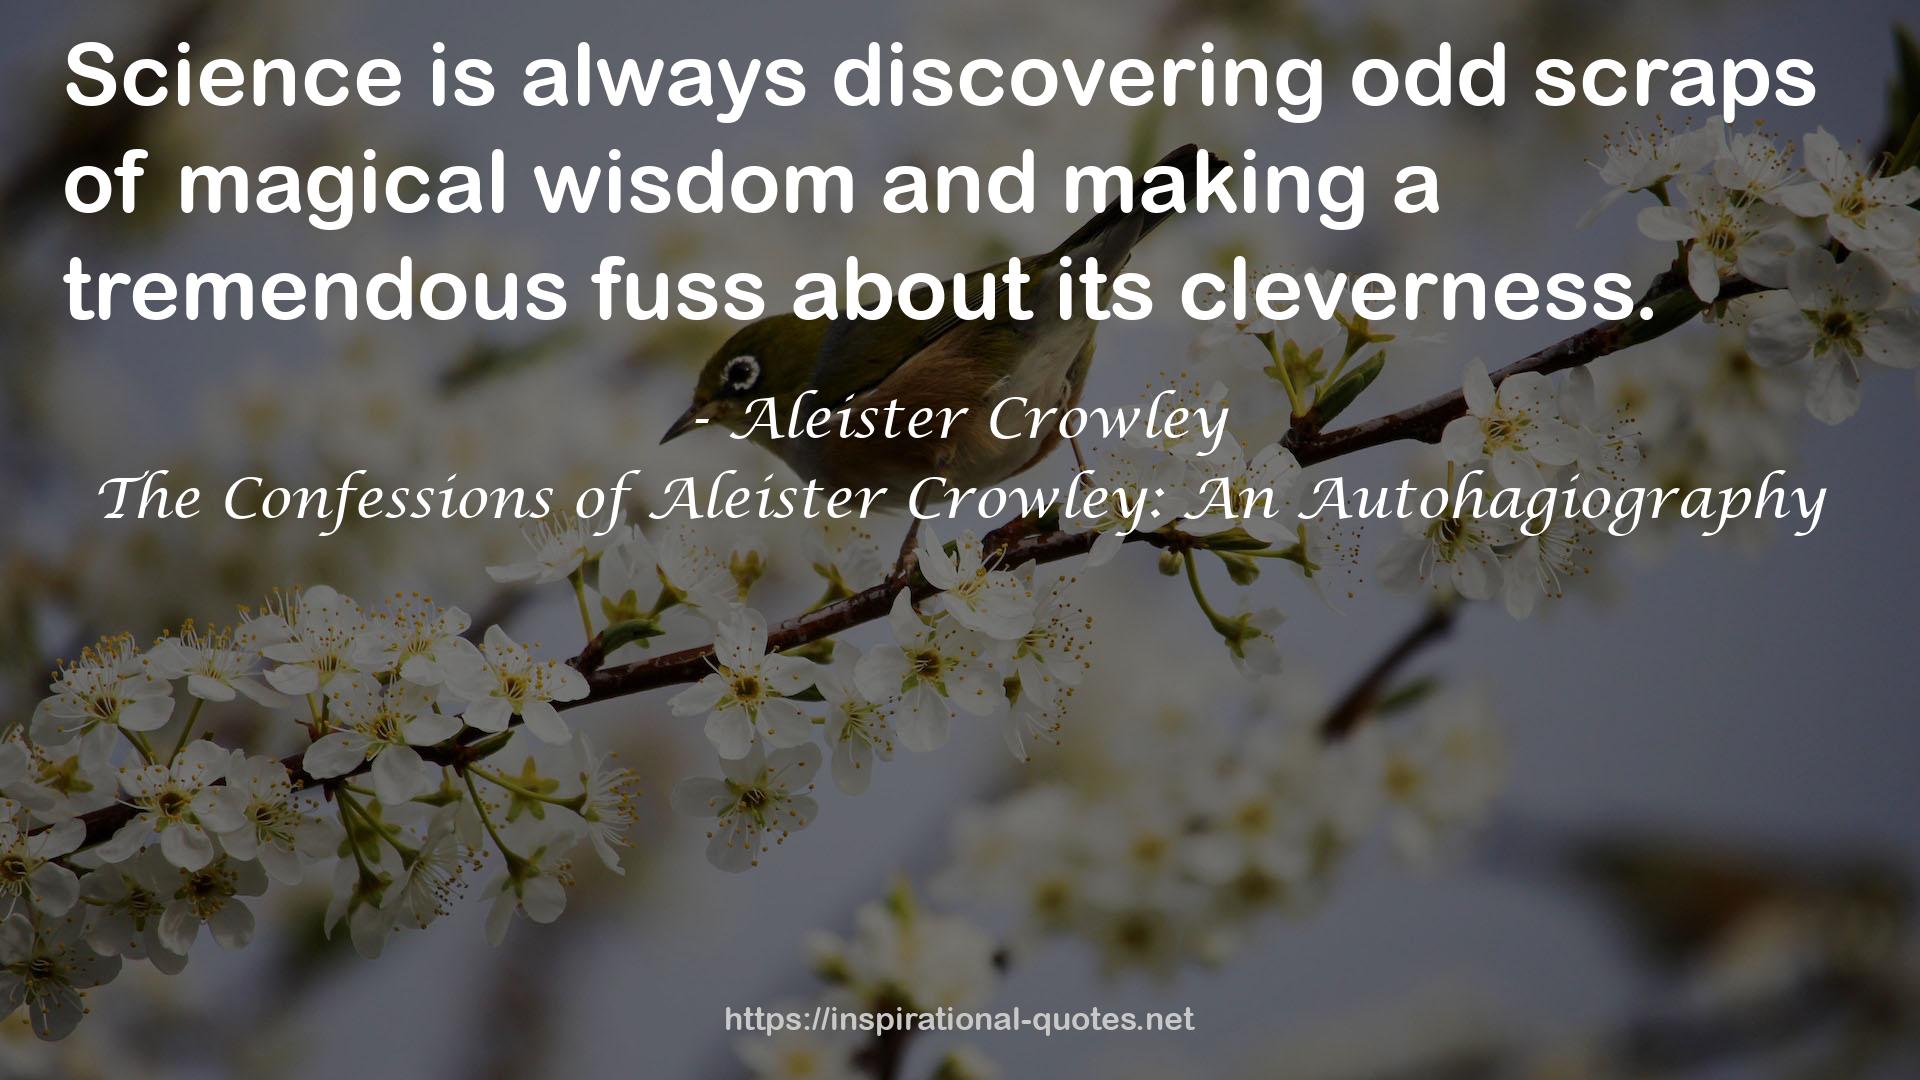 The Confessions of Aleister Crowley: An Autohagiography QUOTES